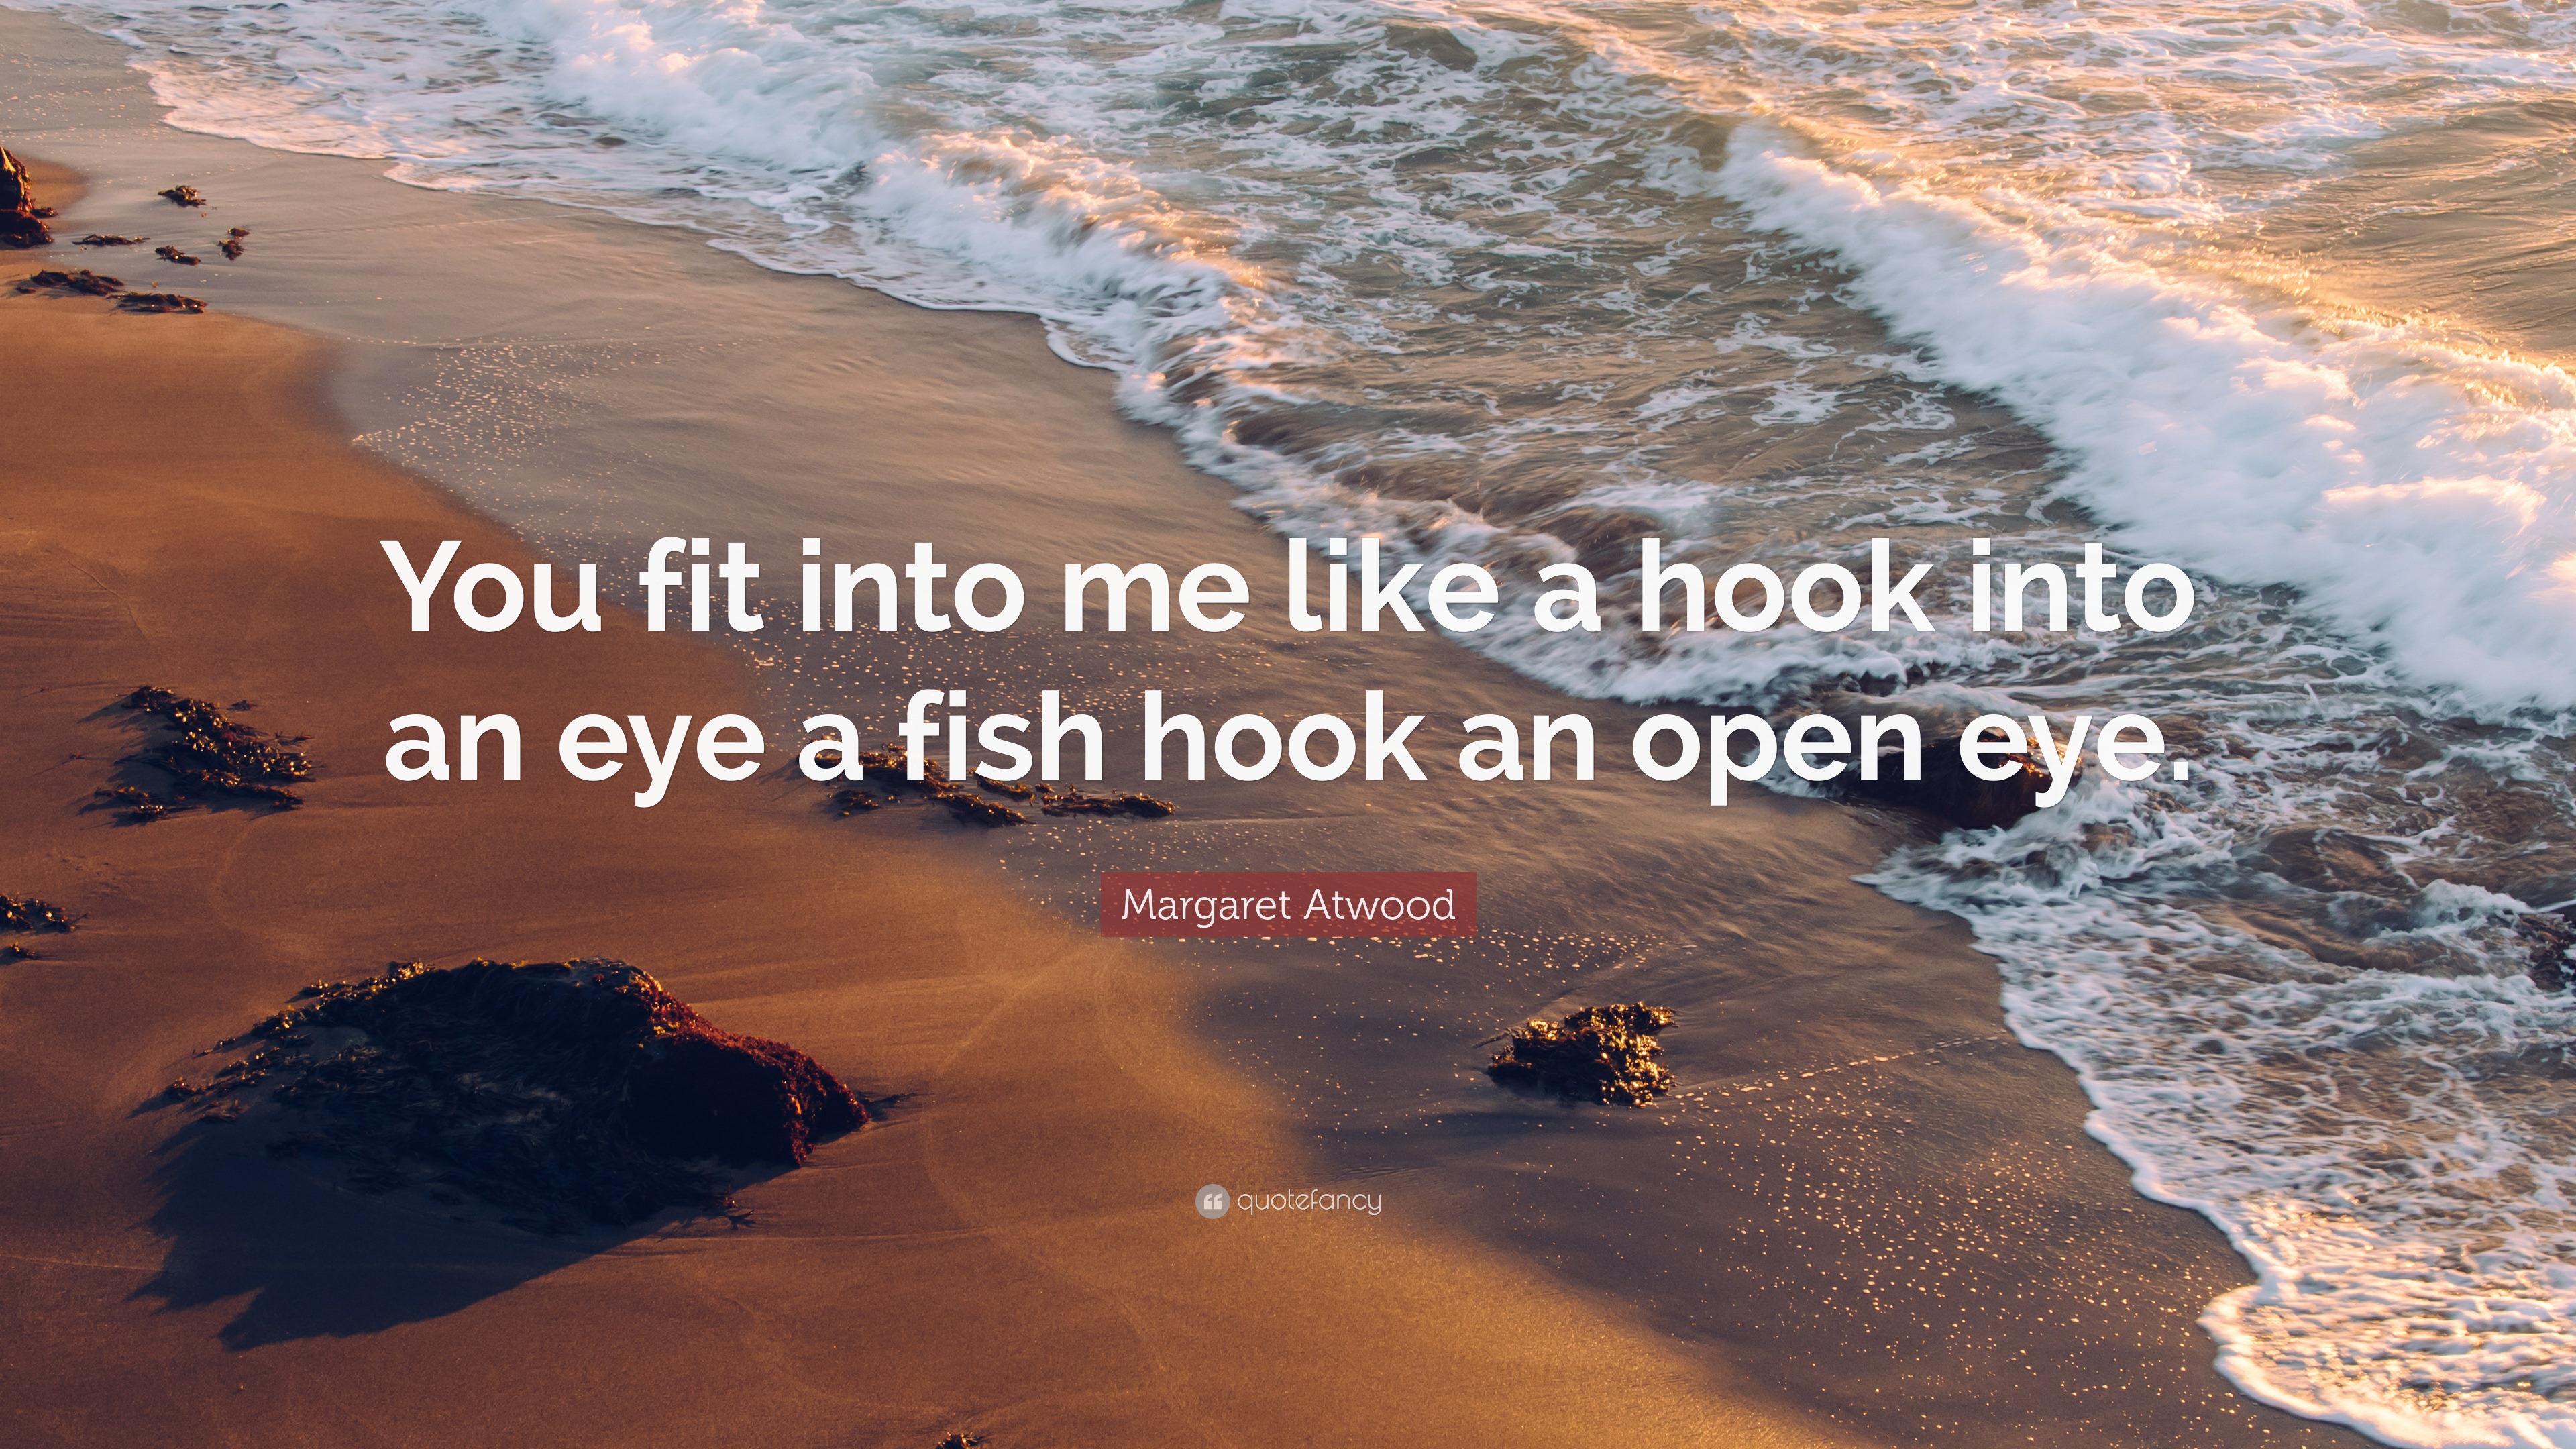 Margaret Atwood Quote: “You fit into me like a hook into an eye a